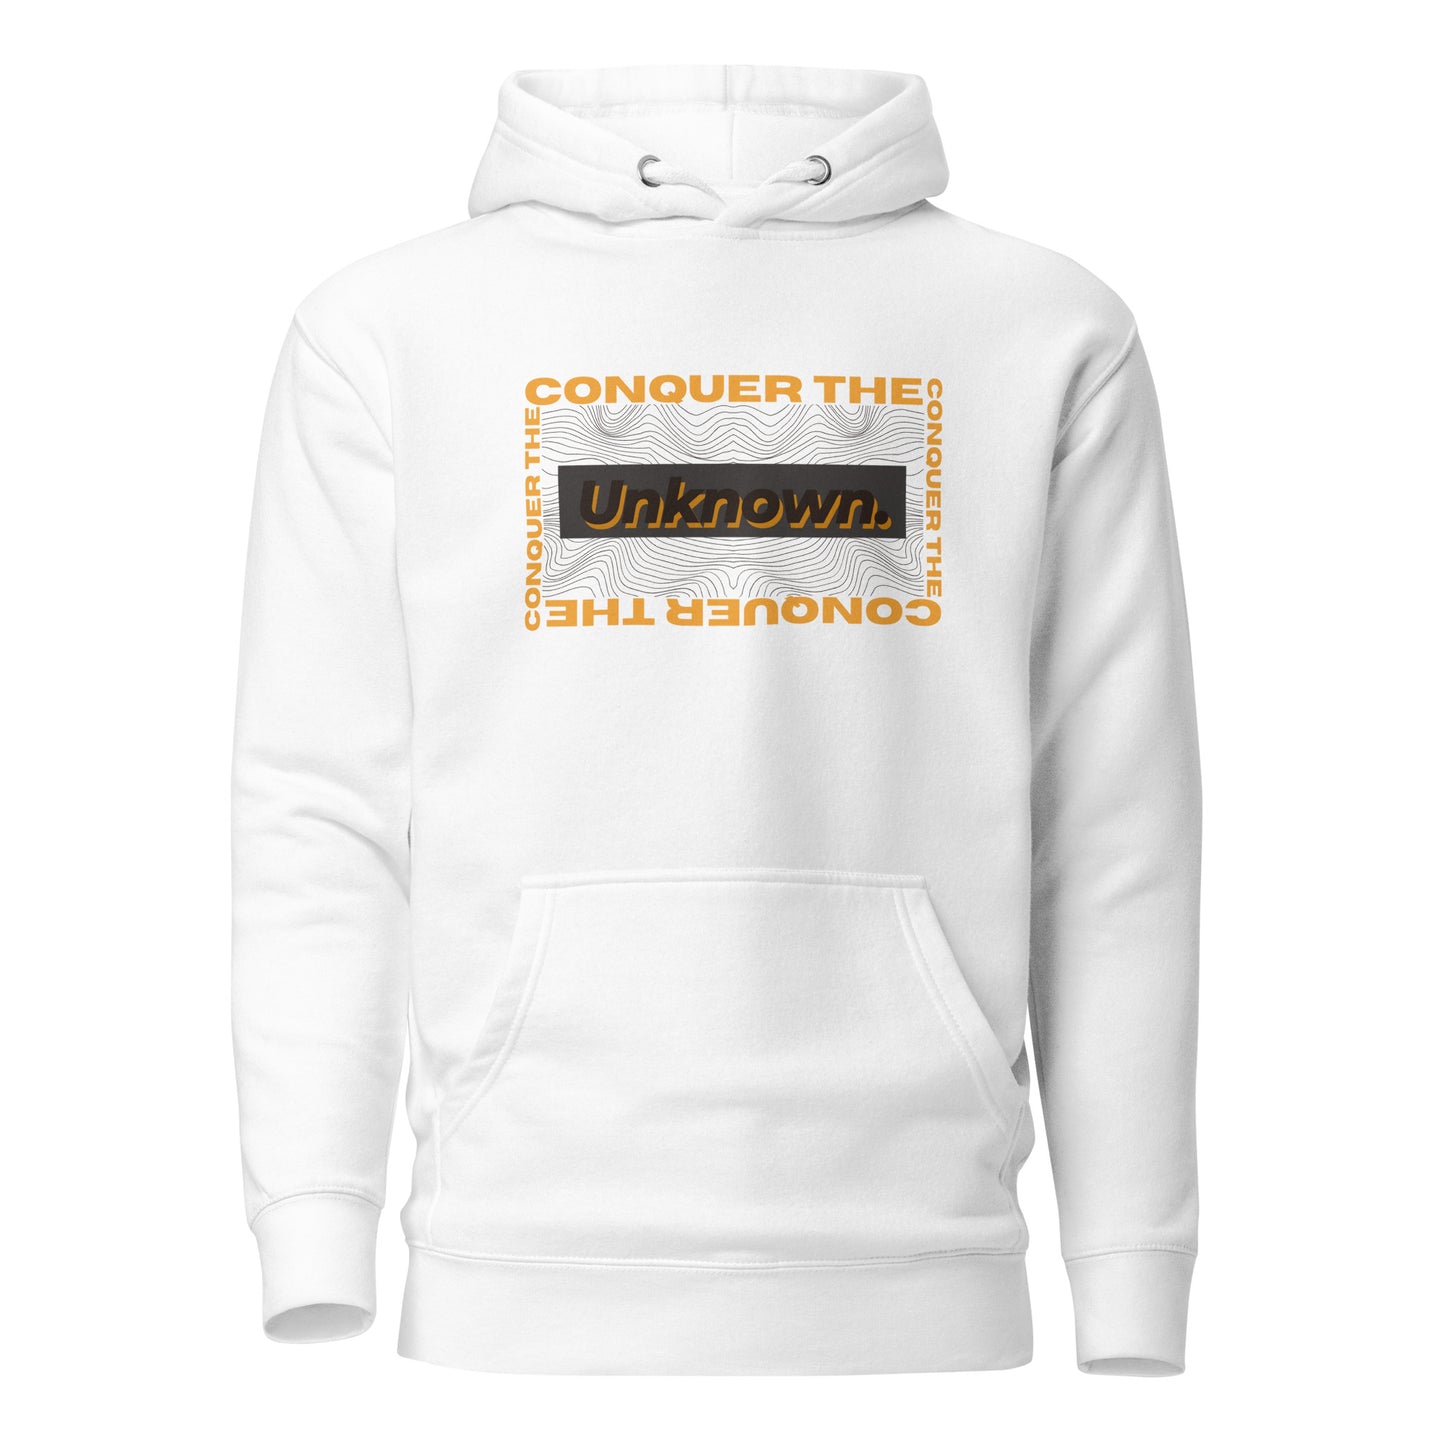 Hoodie - Nike Dunk Low Championship Goldenrod (2021) (Conquer the Unknown)